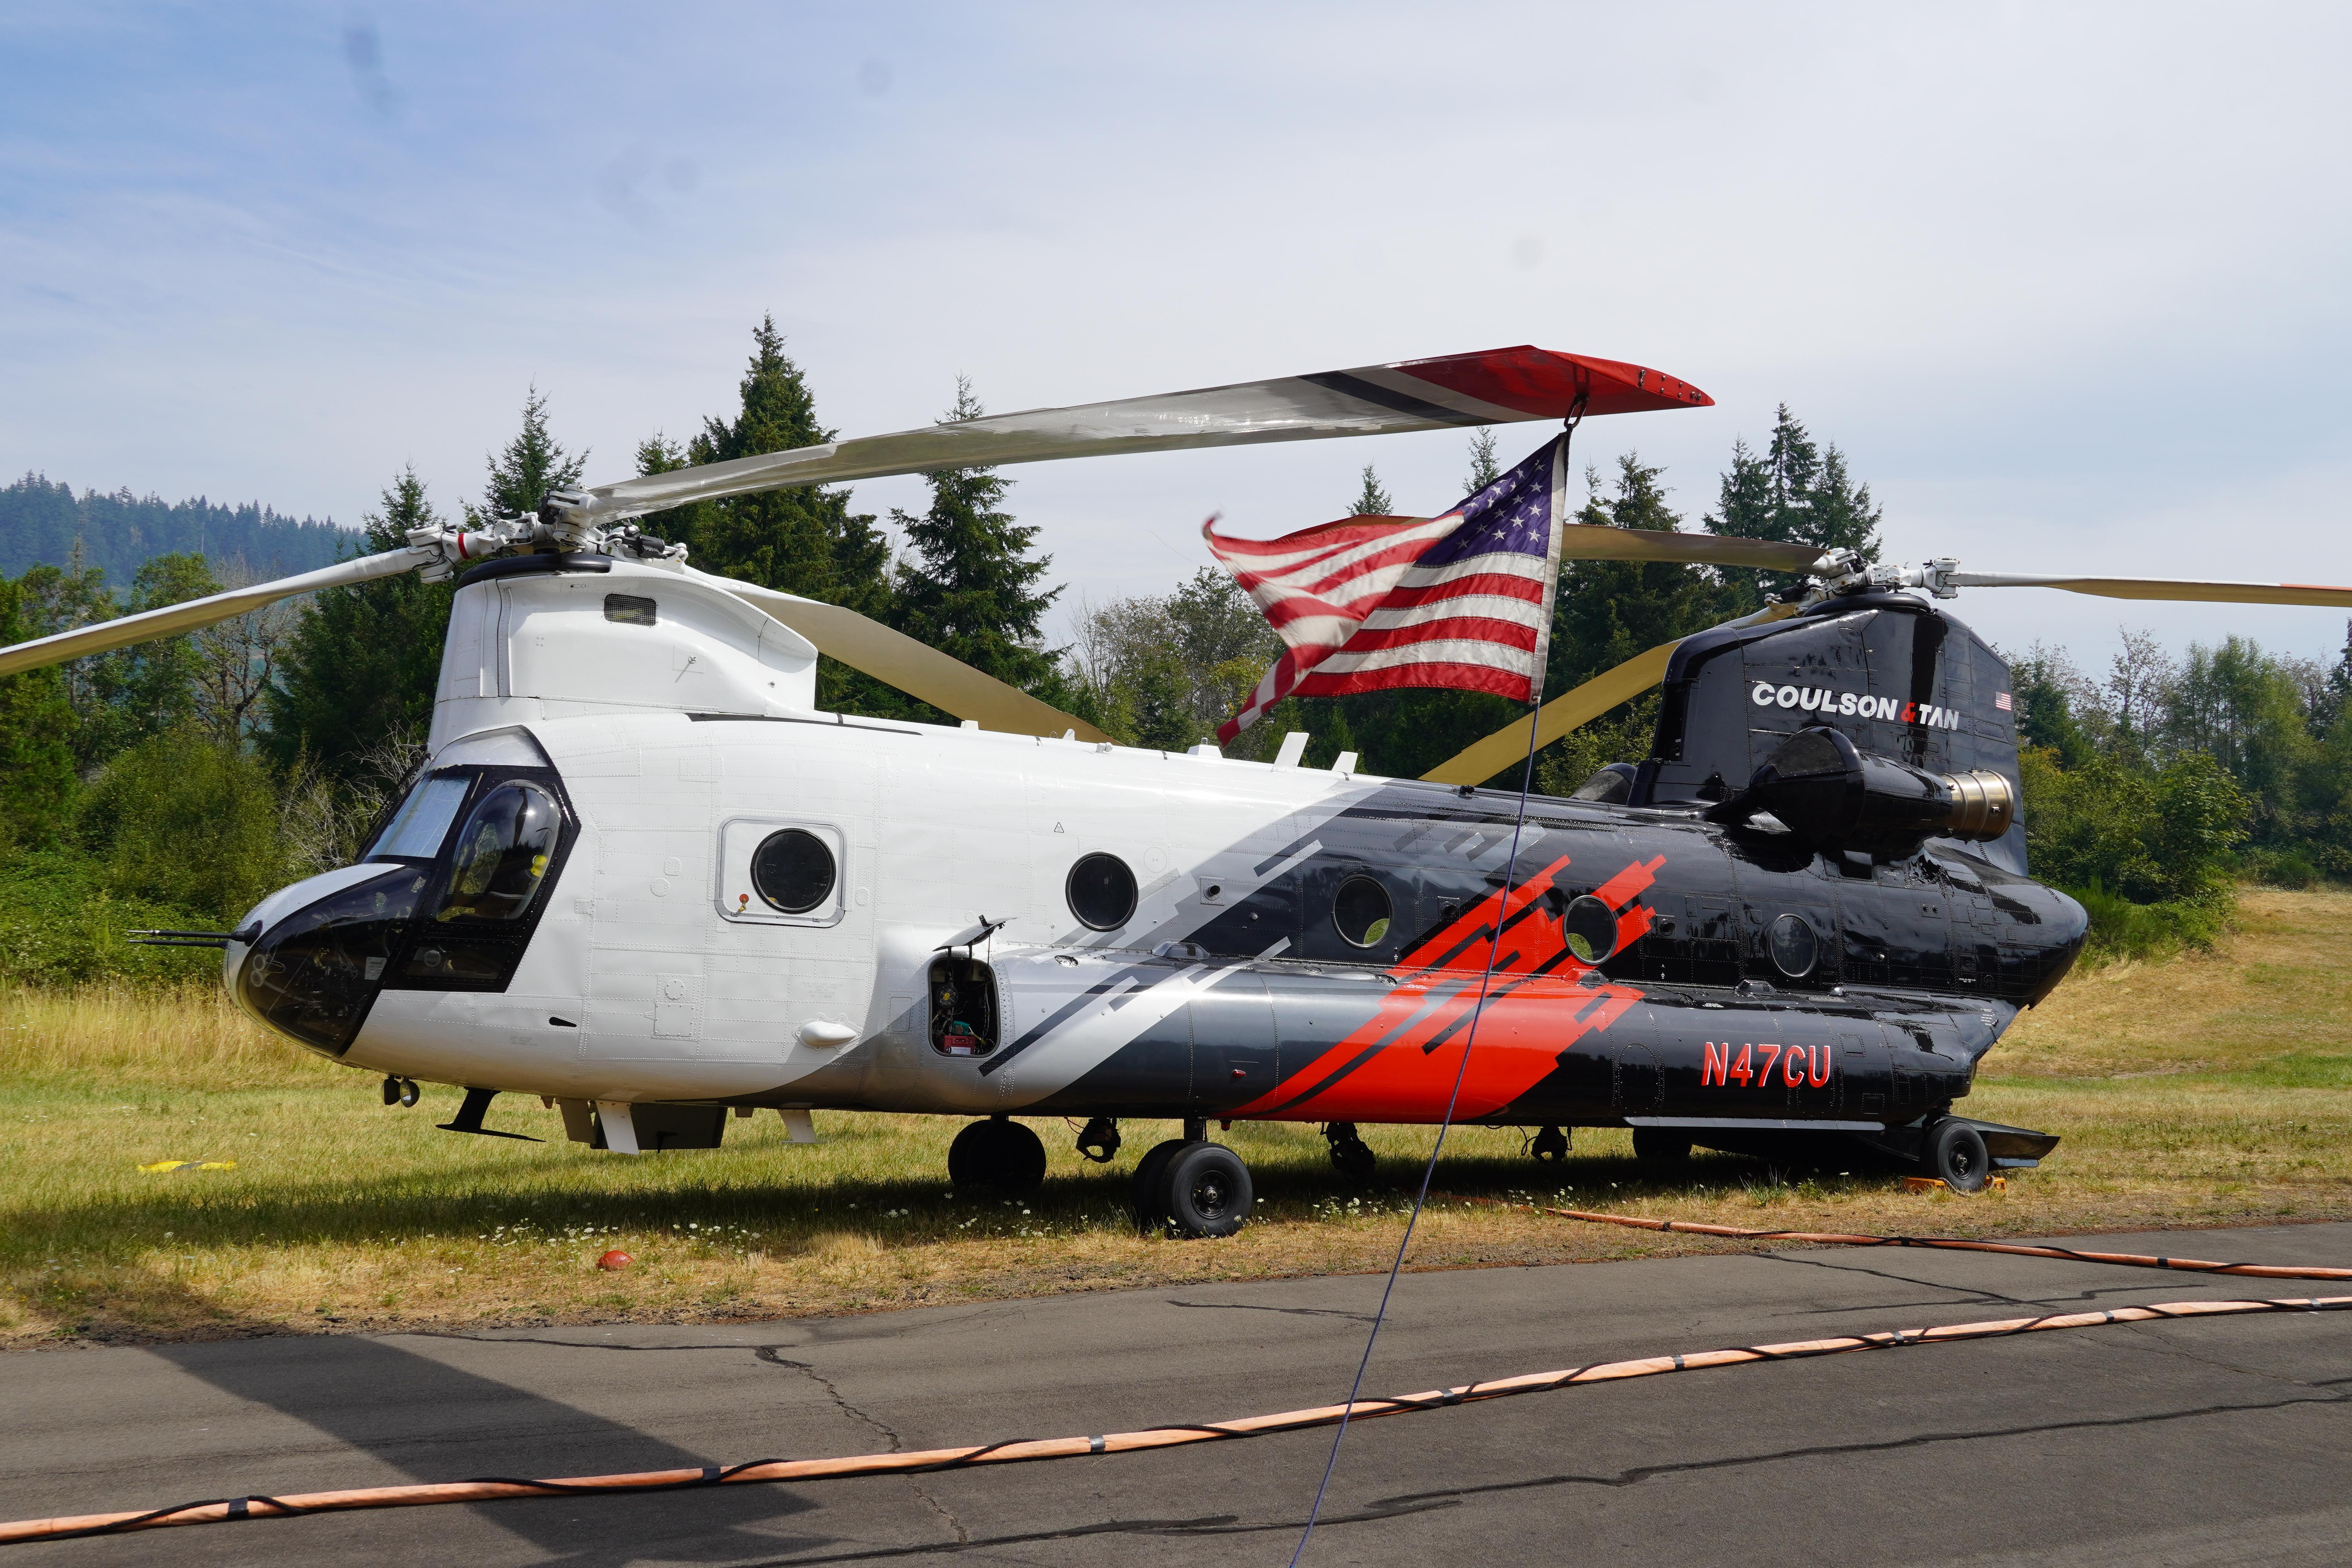 A red, white and blue, twin-rotor helicopter is shown sitting stationary. A US flag is mounted between the rotors.